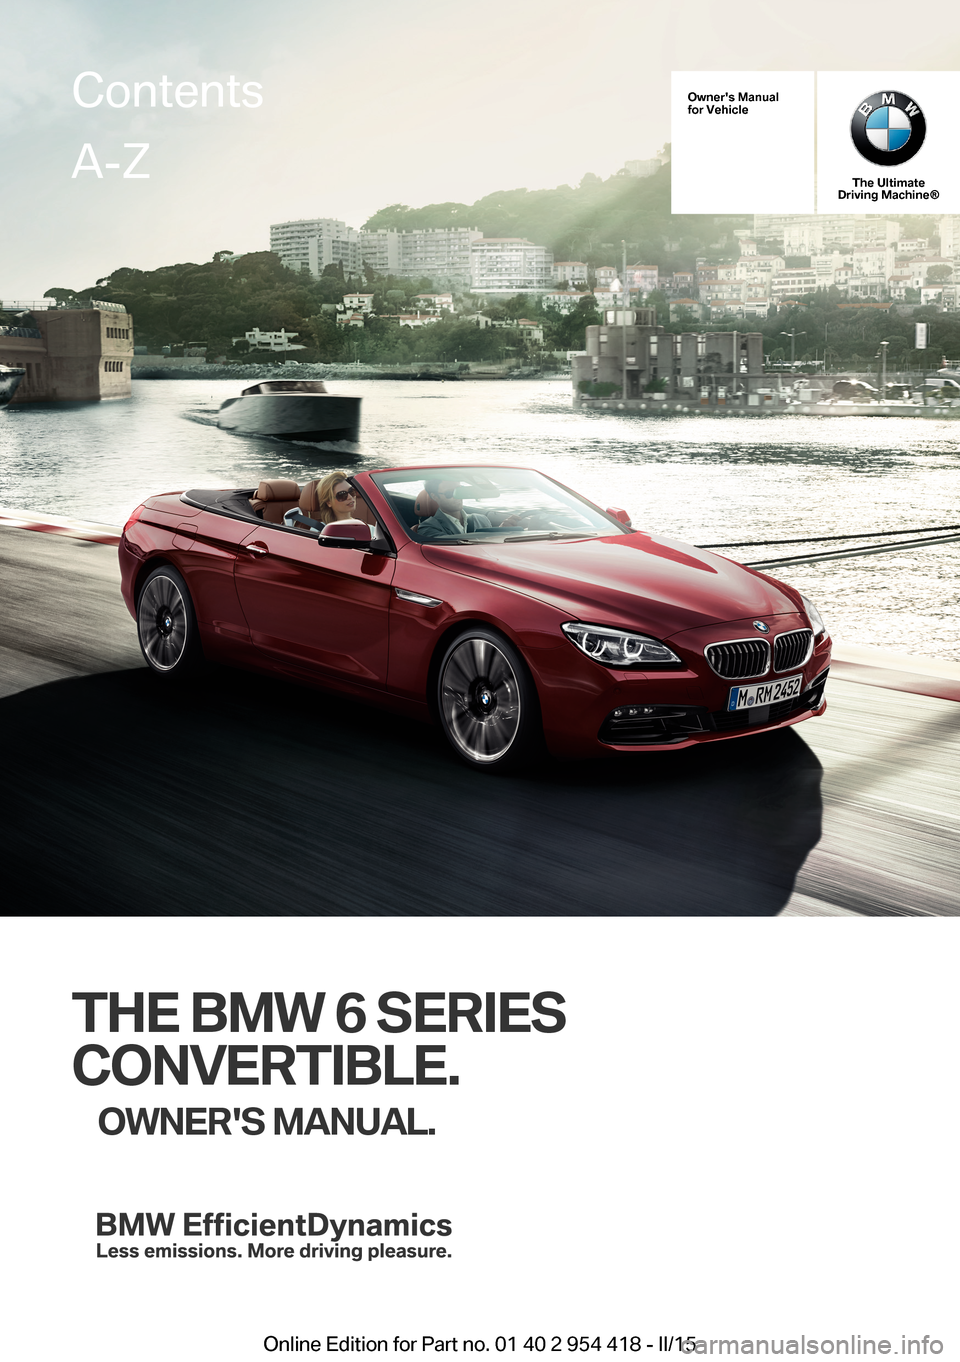 BMW 6 SERIES CONVERTIBLE 2015 F12 Owners Manual Owners Manualfor Vehicle
The UltimateDriving Machine®
THE BMW 6 SERIES
CONVERTIBLE.
OWNERS MANUAL.
ContentsA-Z
Online Edition for Part no. 01 40 2 954 418 - II/15   